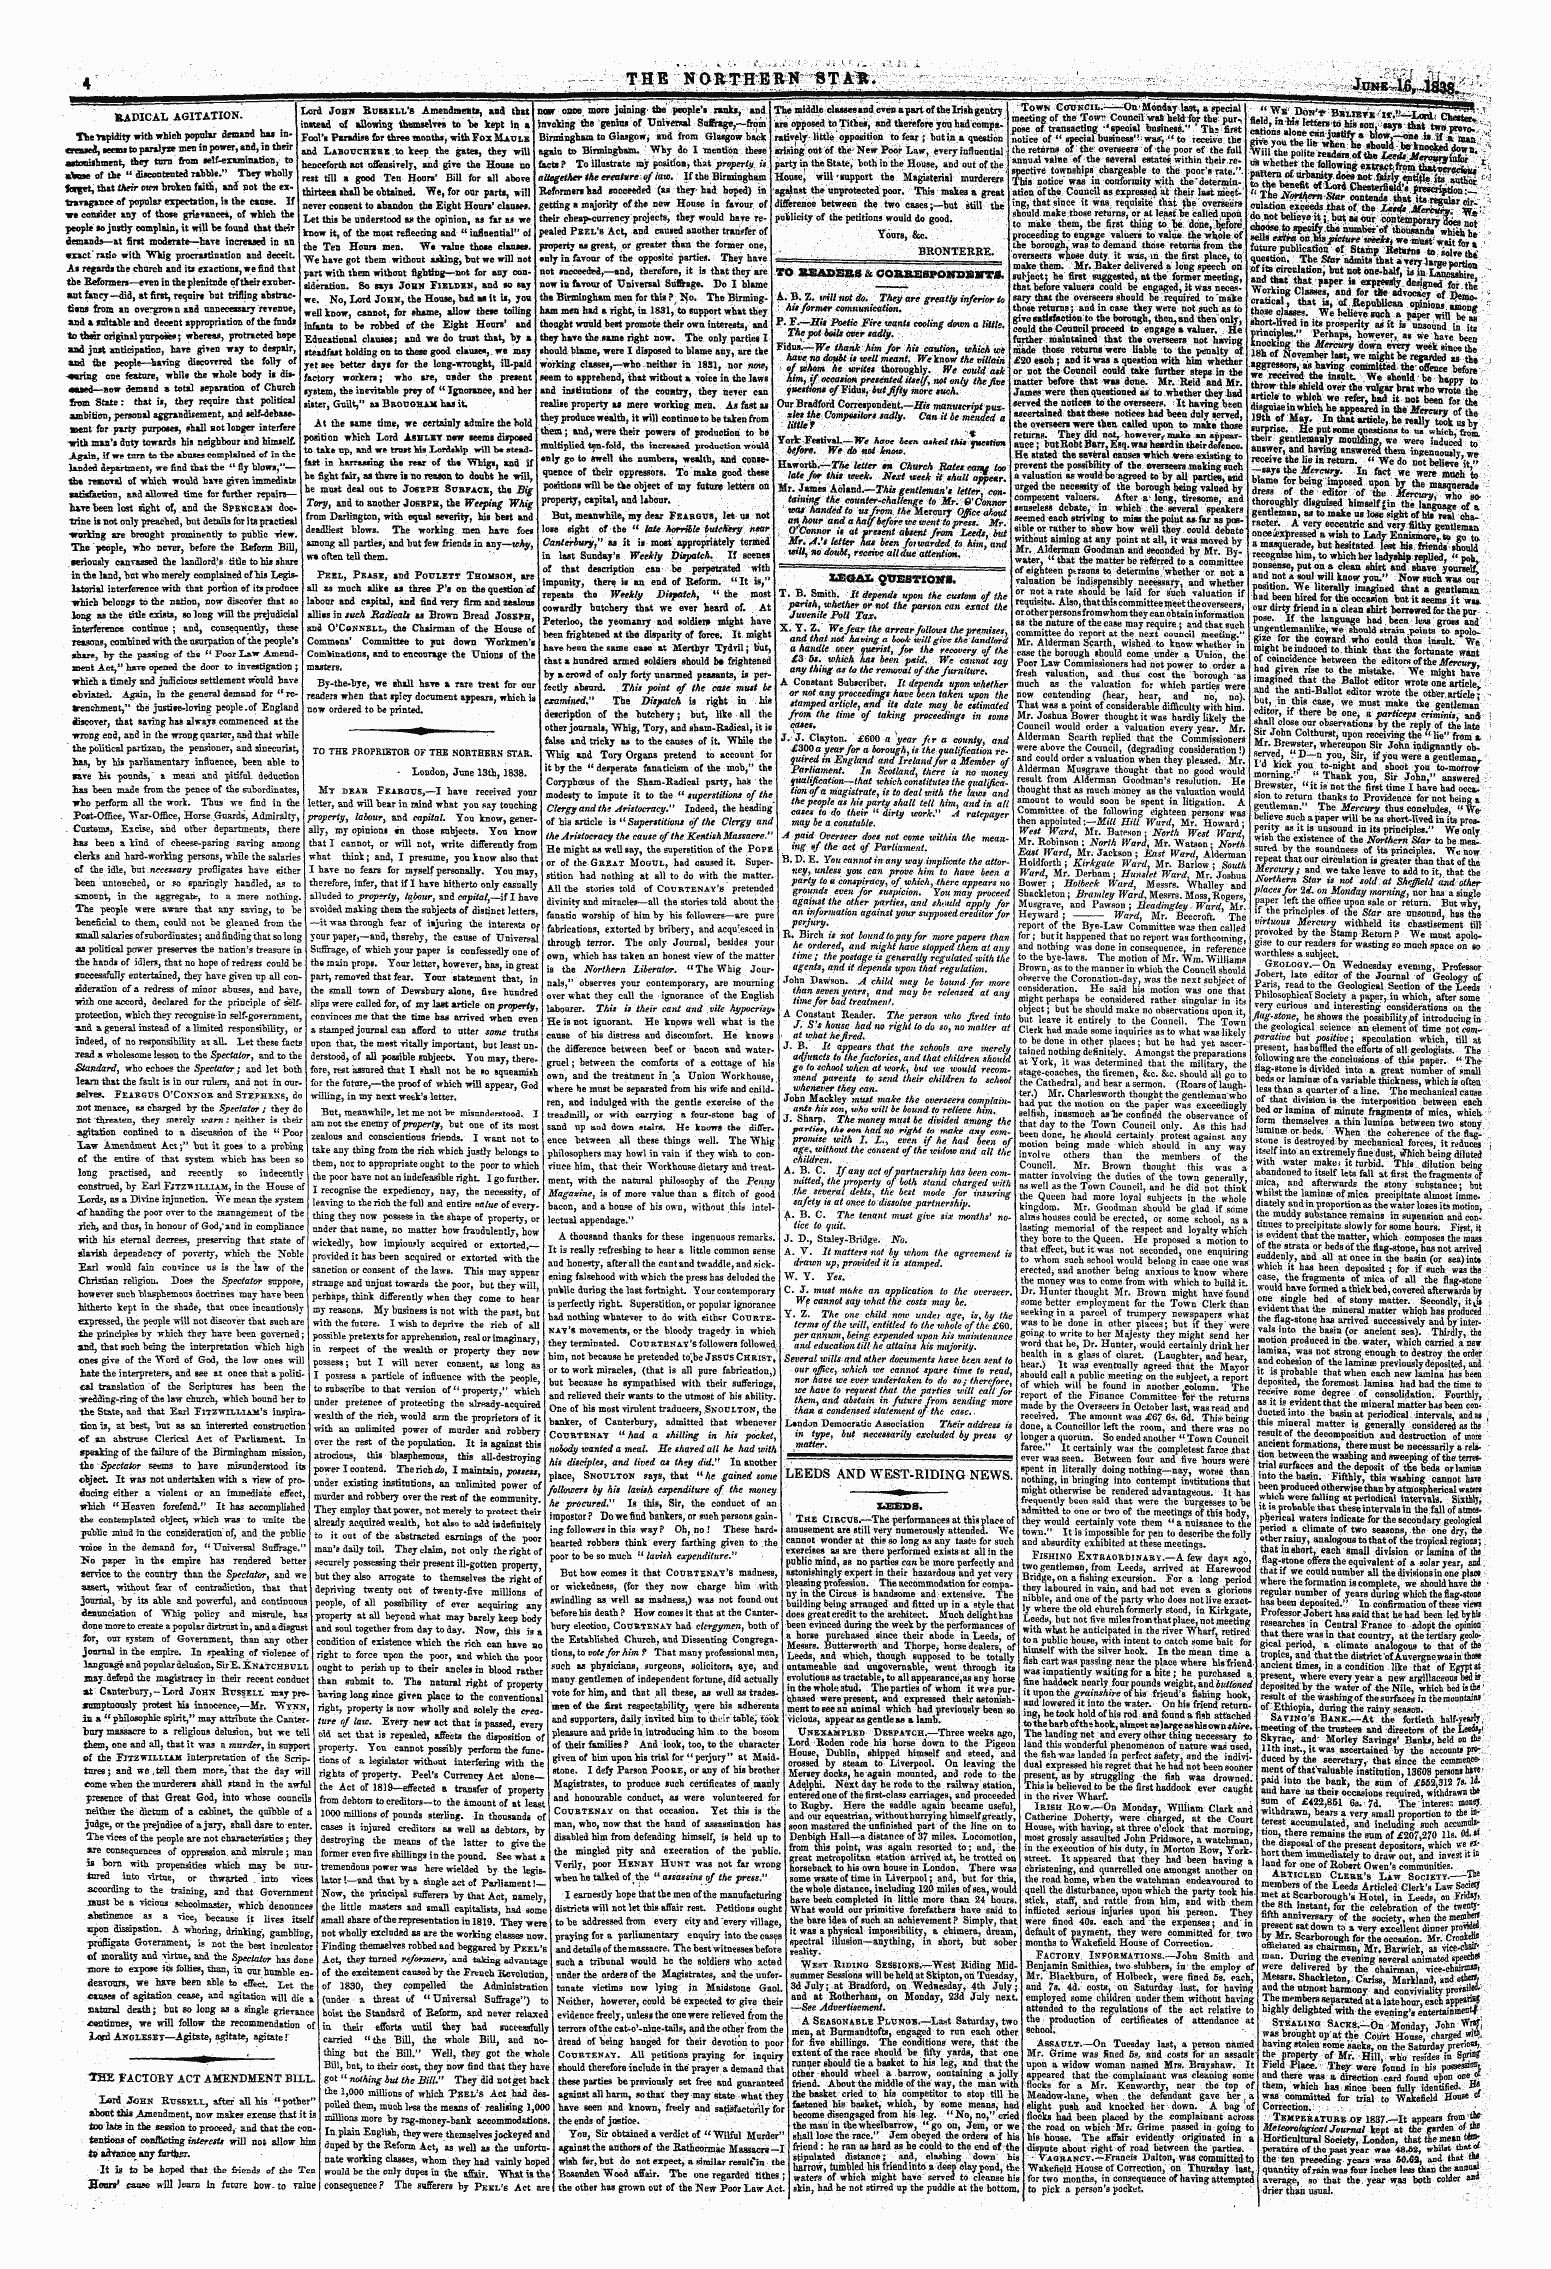 Northern Star (1837-1852): jS F Y, 1st edition - Leeds And West-Riding News